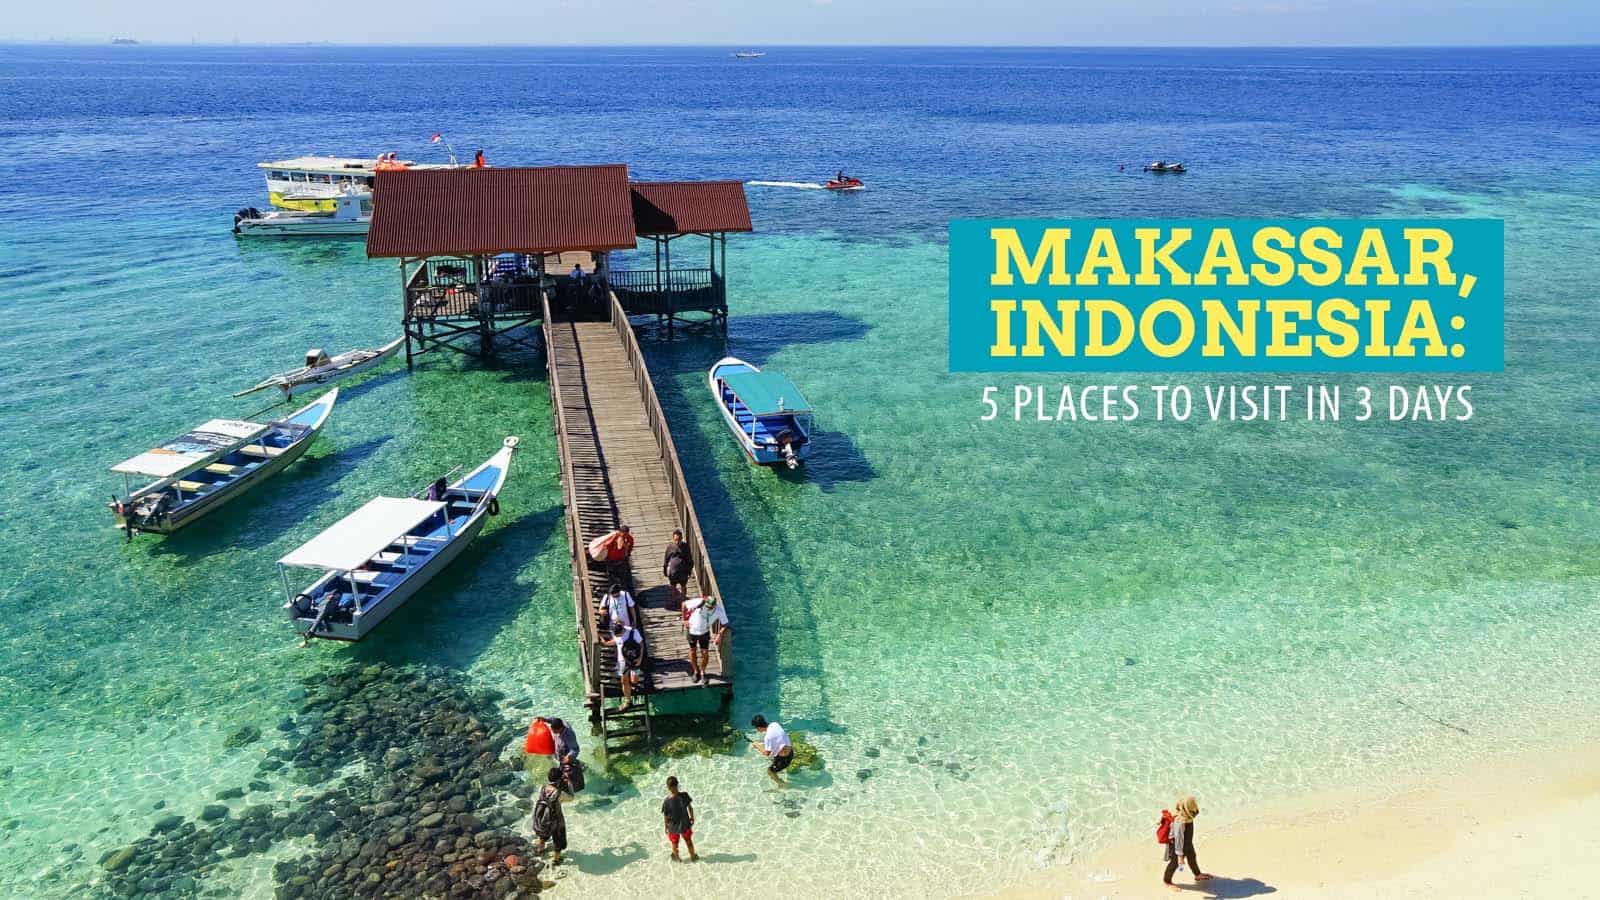 Makassar, Indonesia: 5 Places to Visit in 3 Days | The Poor Traveler  Itinerary Blog